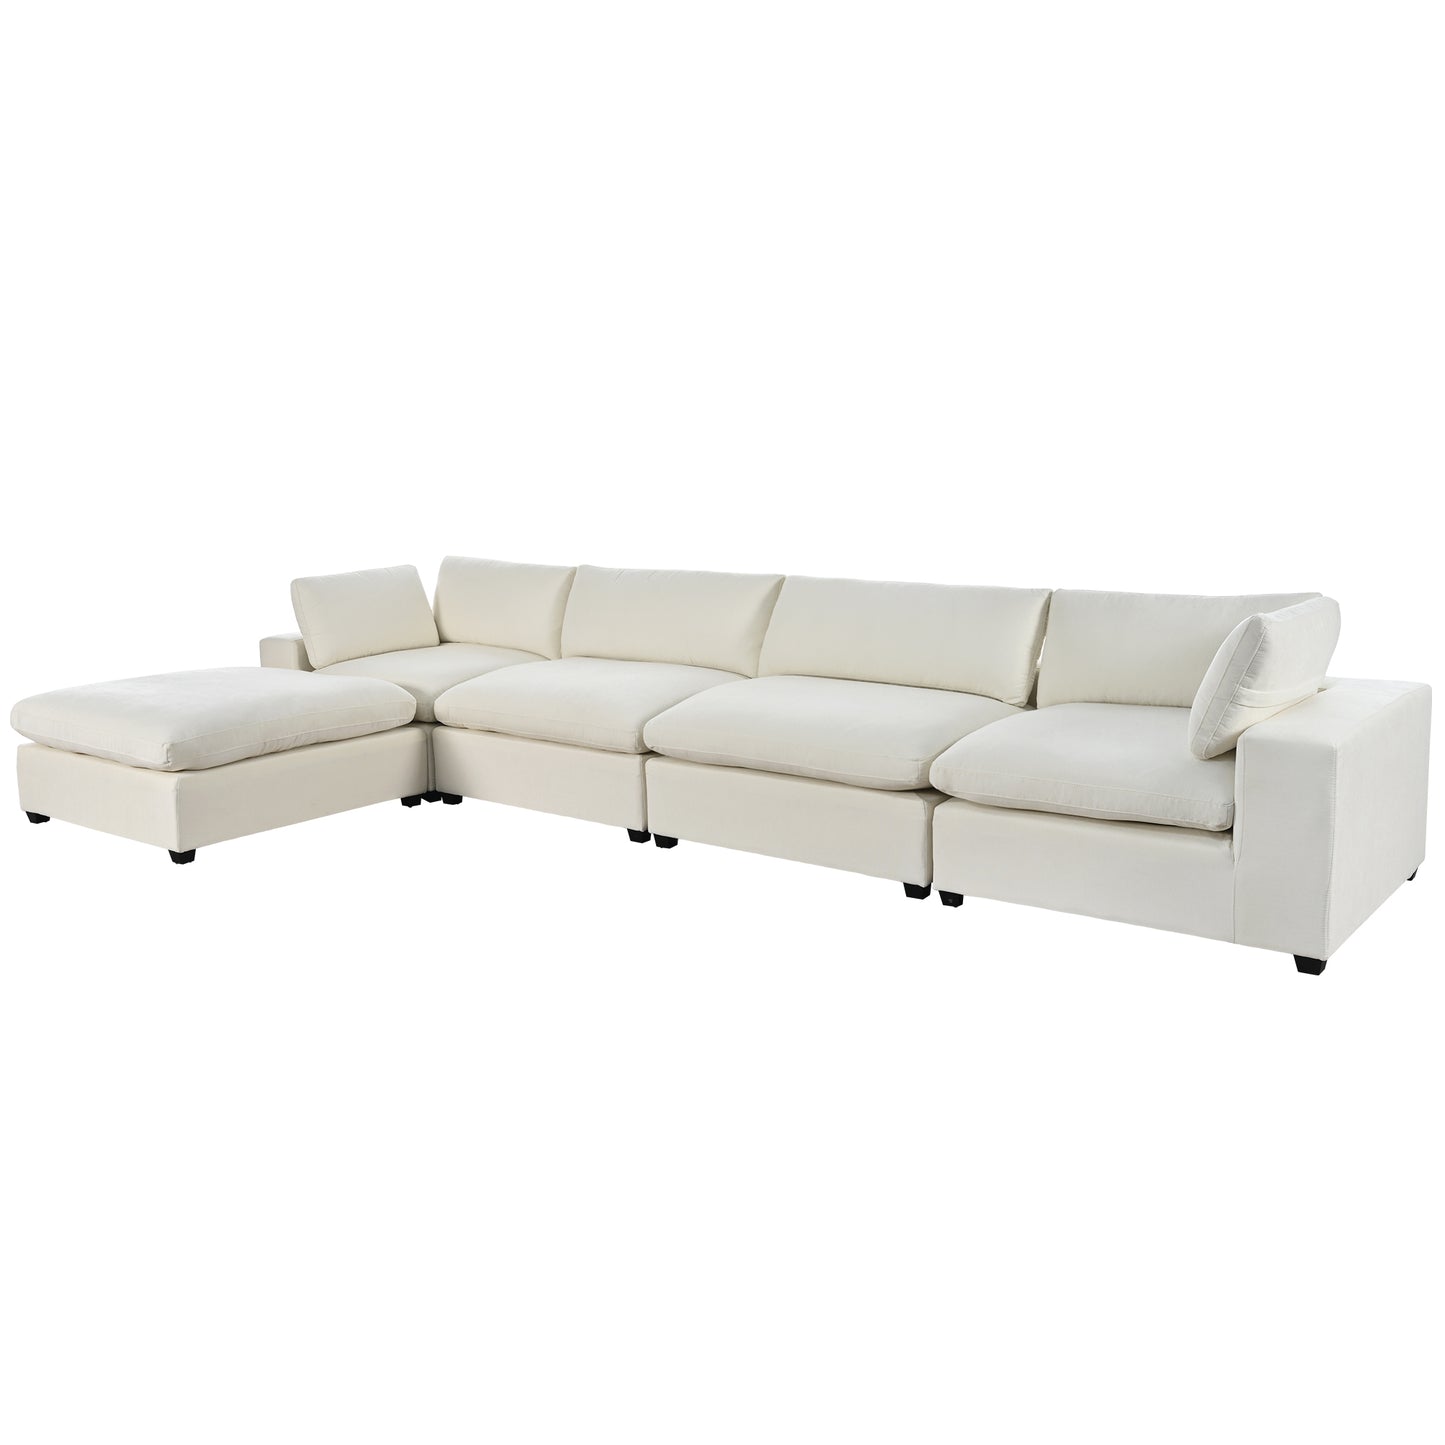 Summit Navy Modular Sectional - 5 Seat L-Configuration